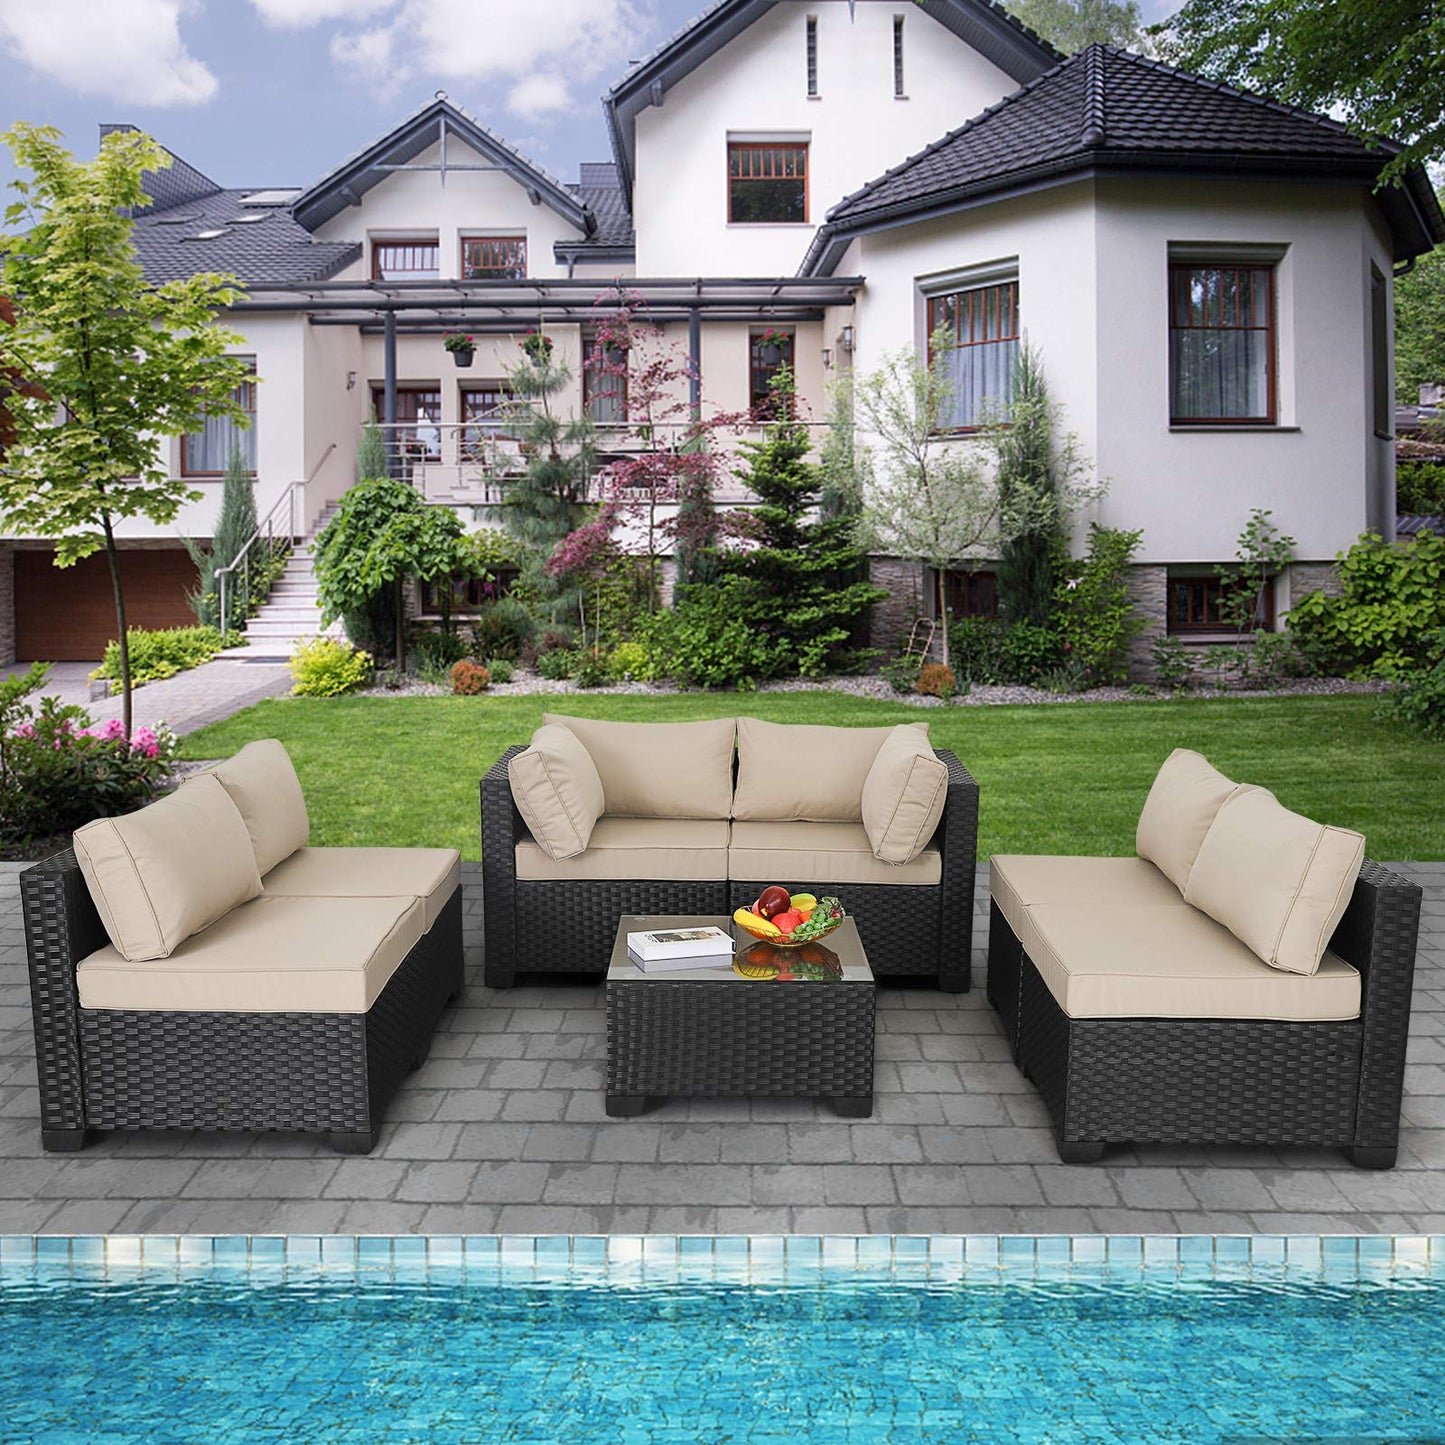 Valita 7 Piece Outdoor PE Wicker Furniture Set, Patio Black Rattan Sectional Sofa Couch with Washable Khaki Cushions…